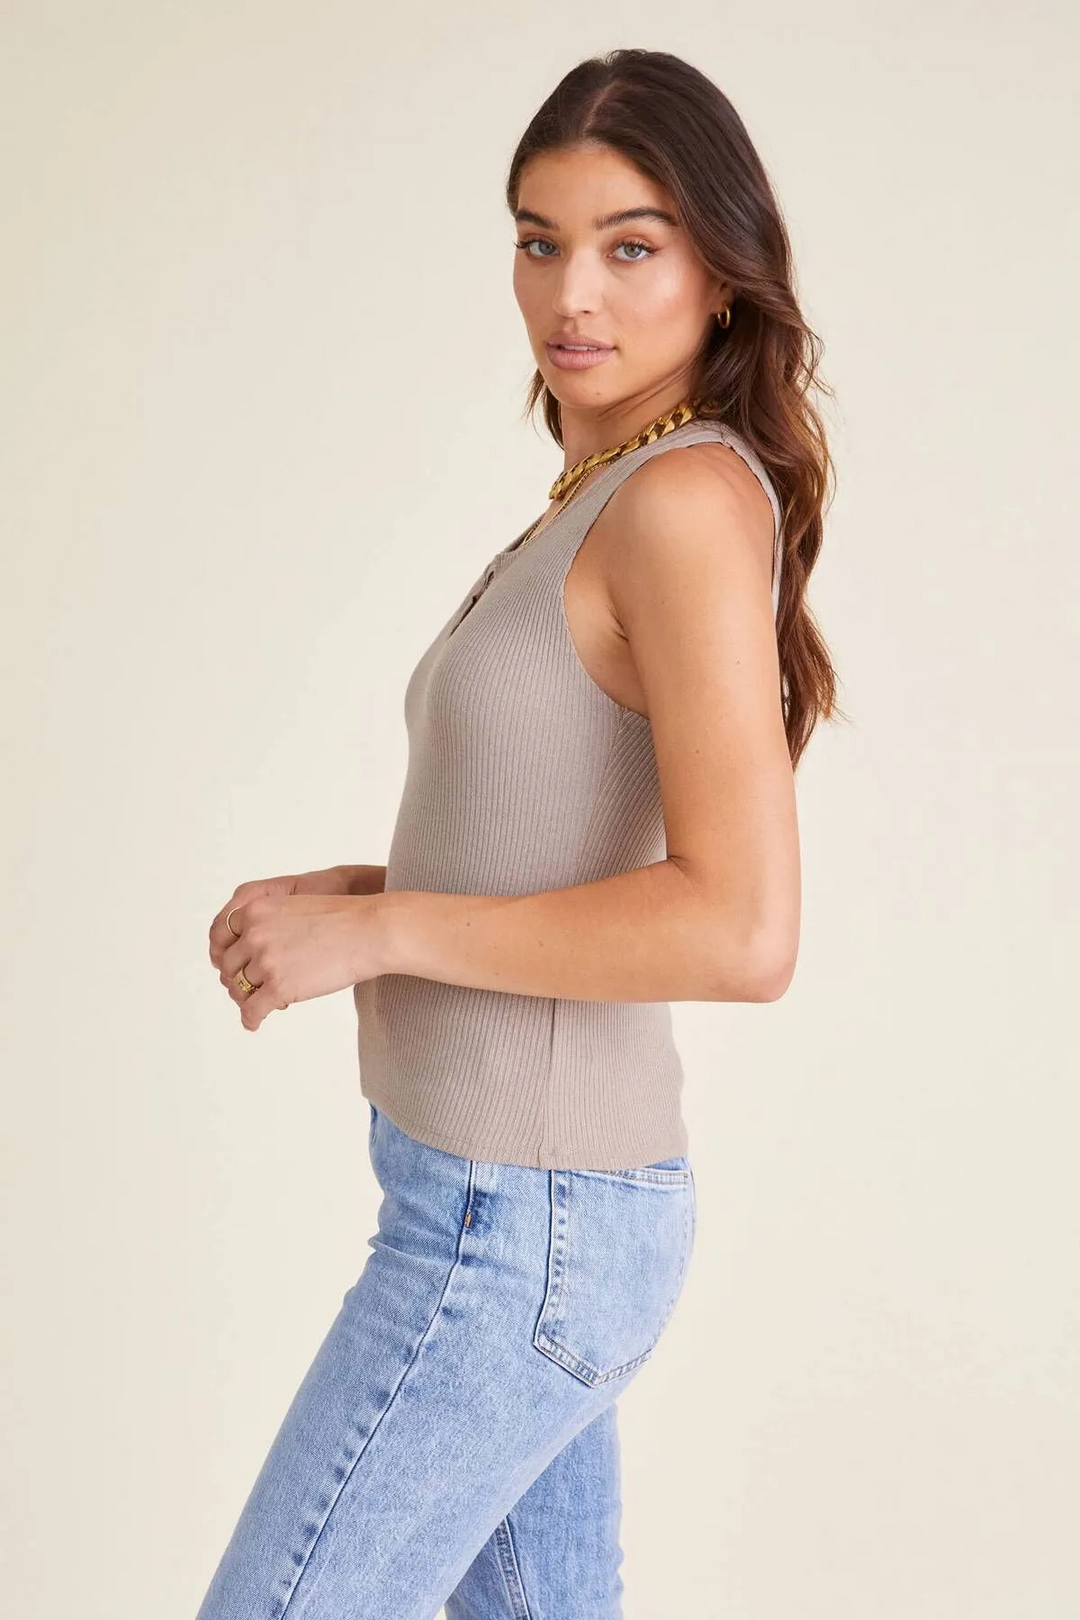 WASHED ARMY INCA RIB TANK - Kingfisher Road - Online Boutique